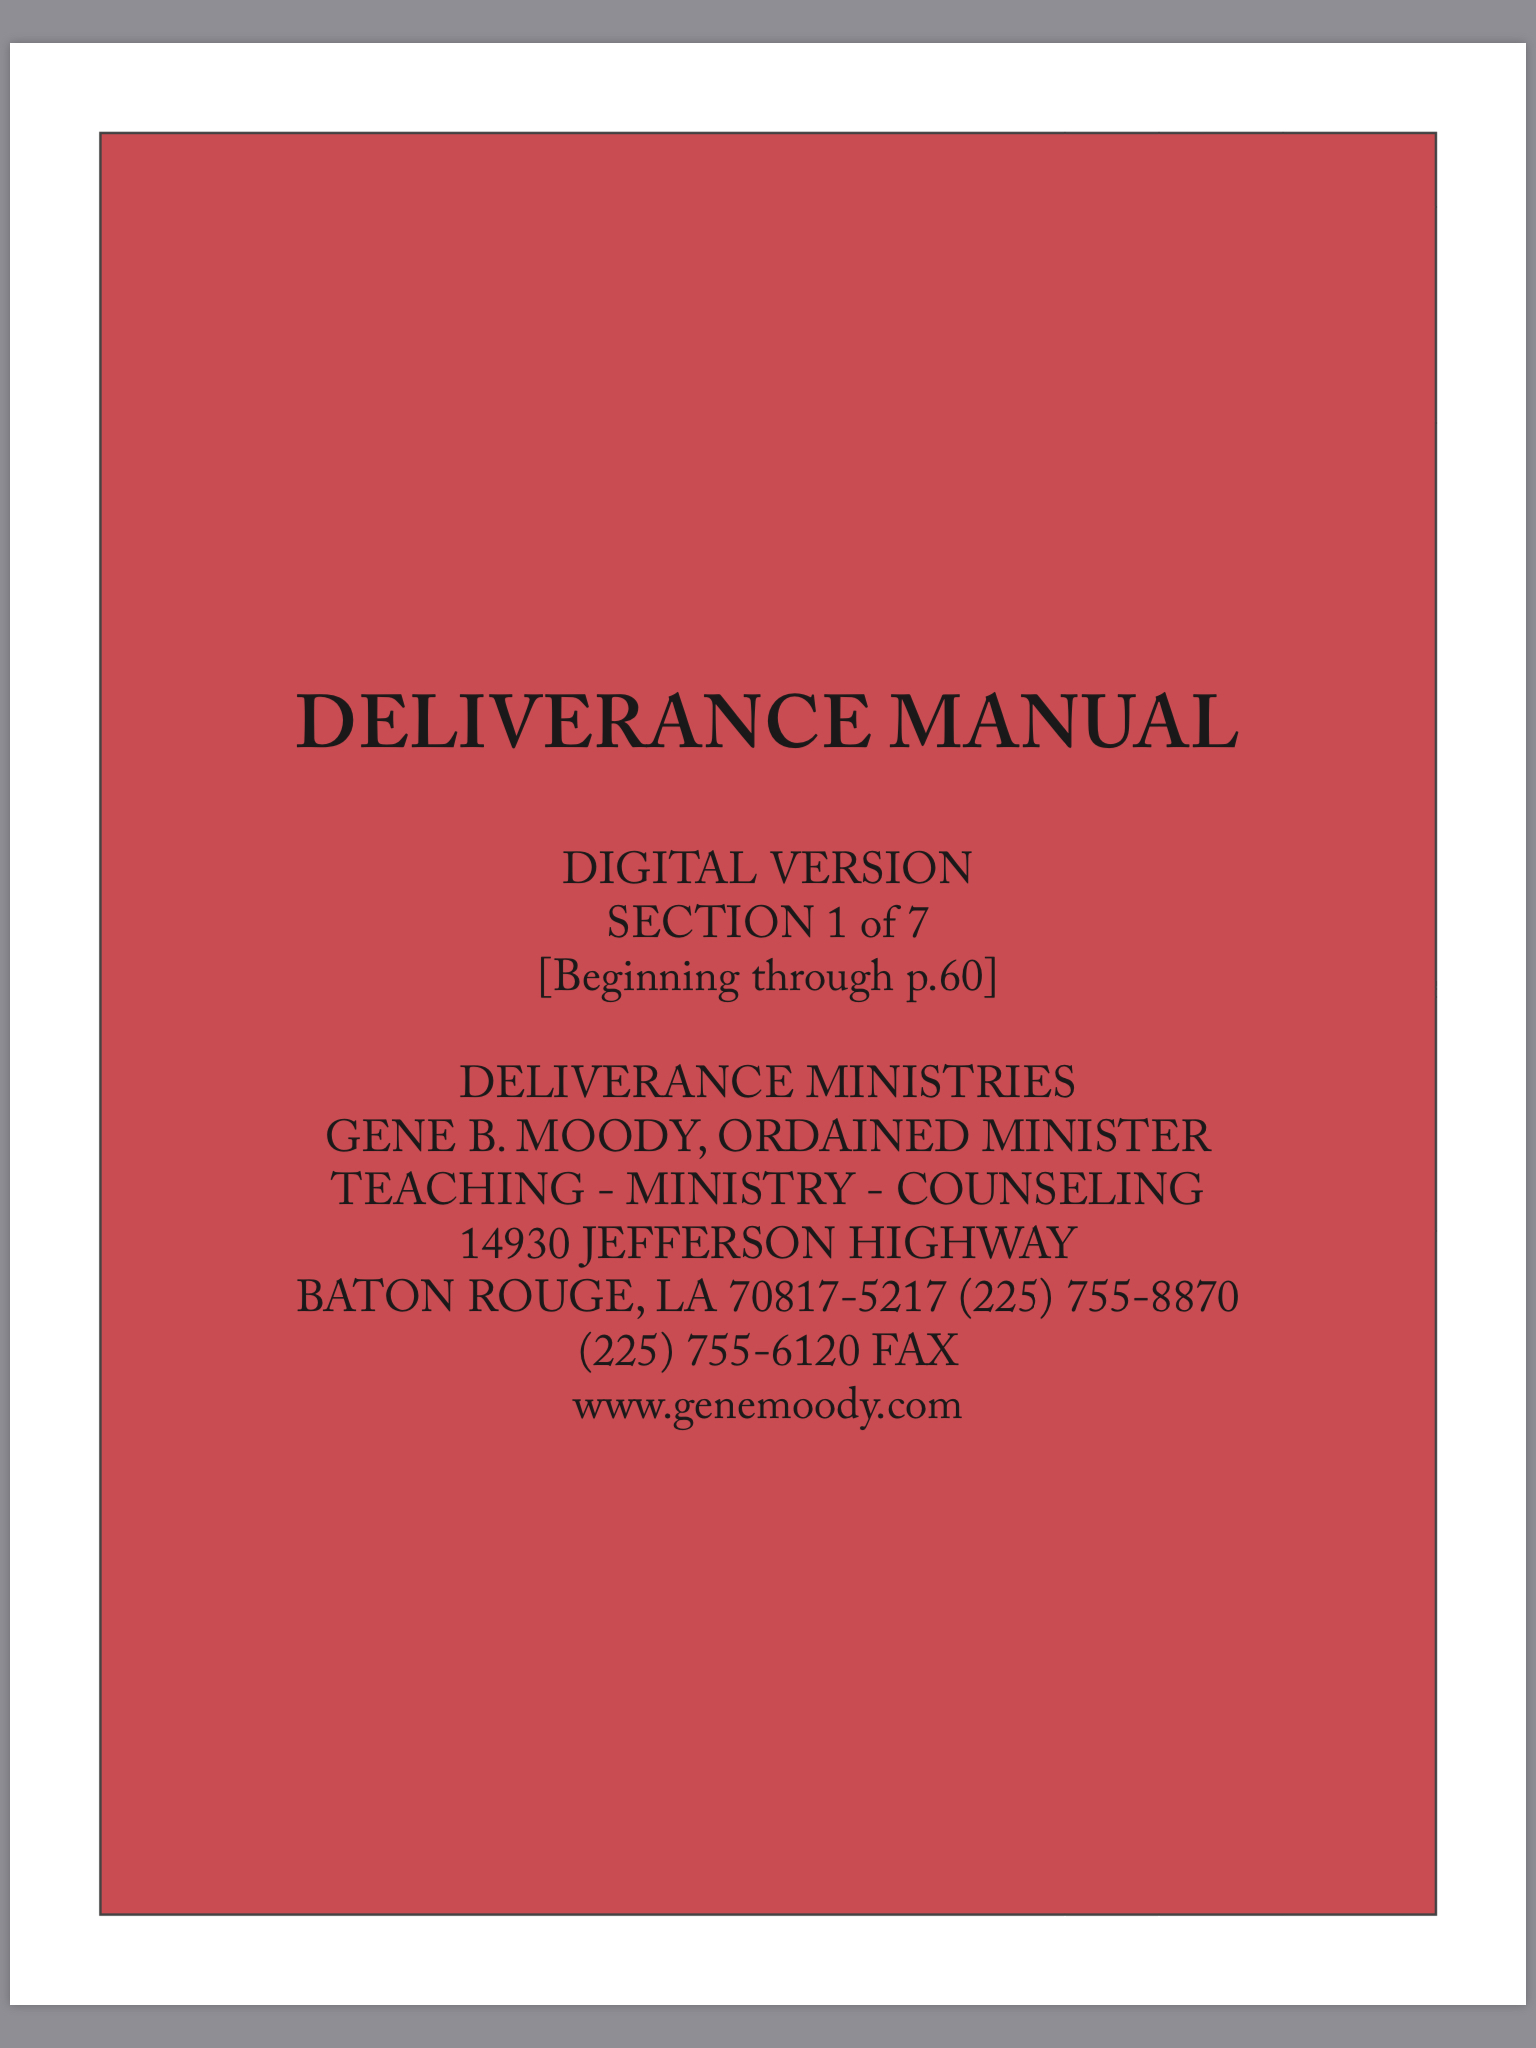 A red cover of the deliverance manual.